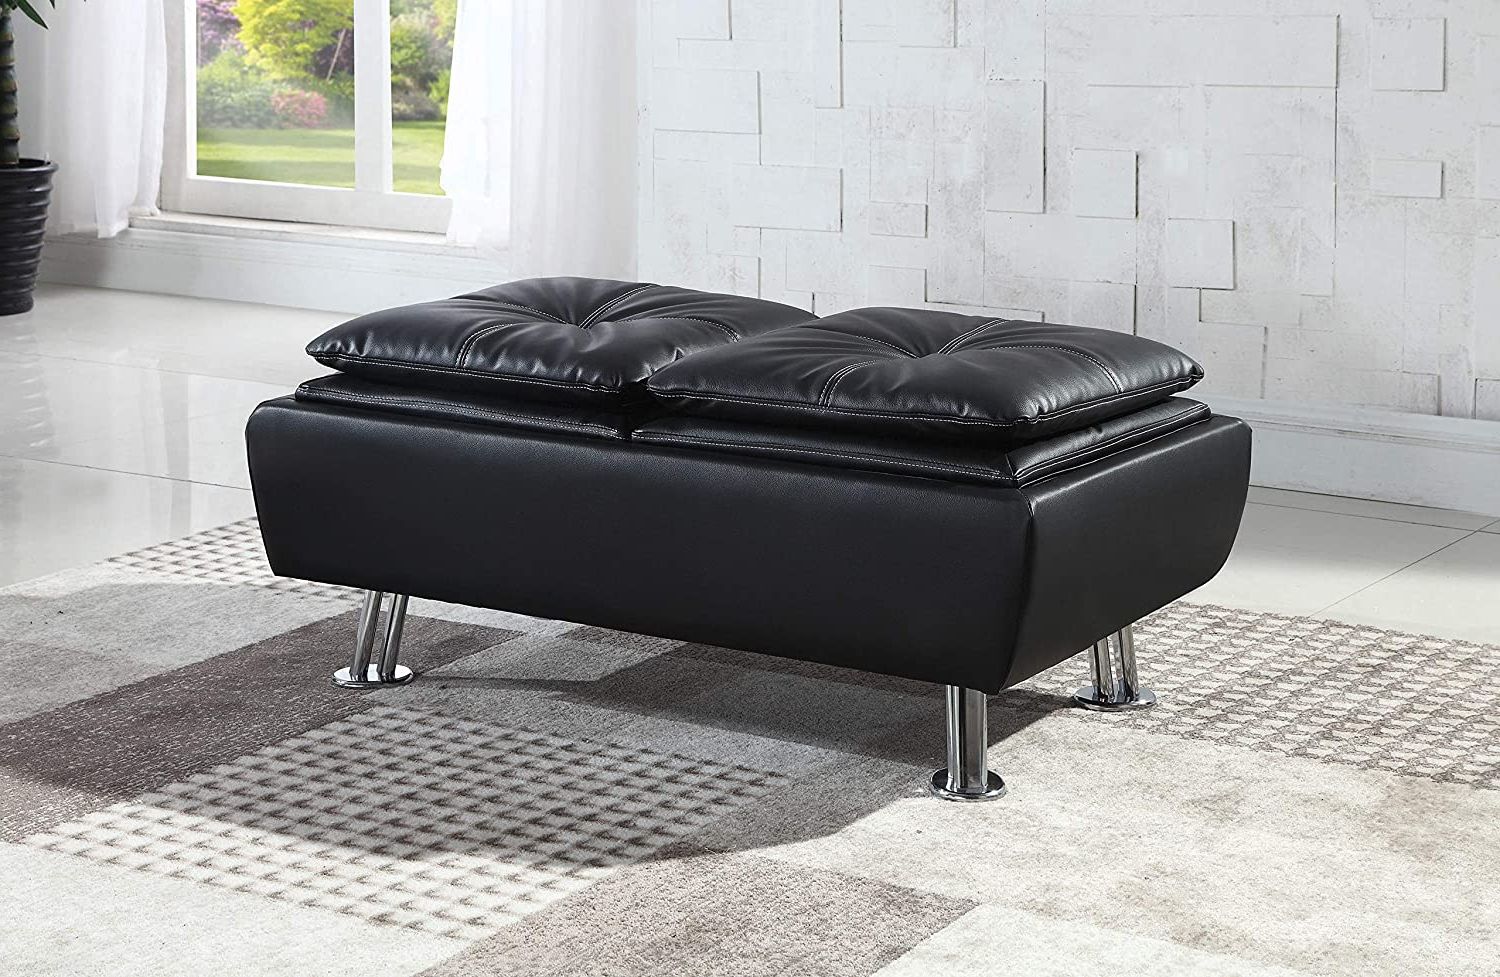 Rafael Faux Leather Storage Ottoman With Reversible Tray Tops Black,   (View 9 of 15)